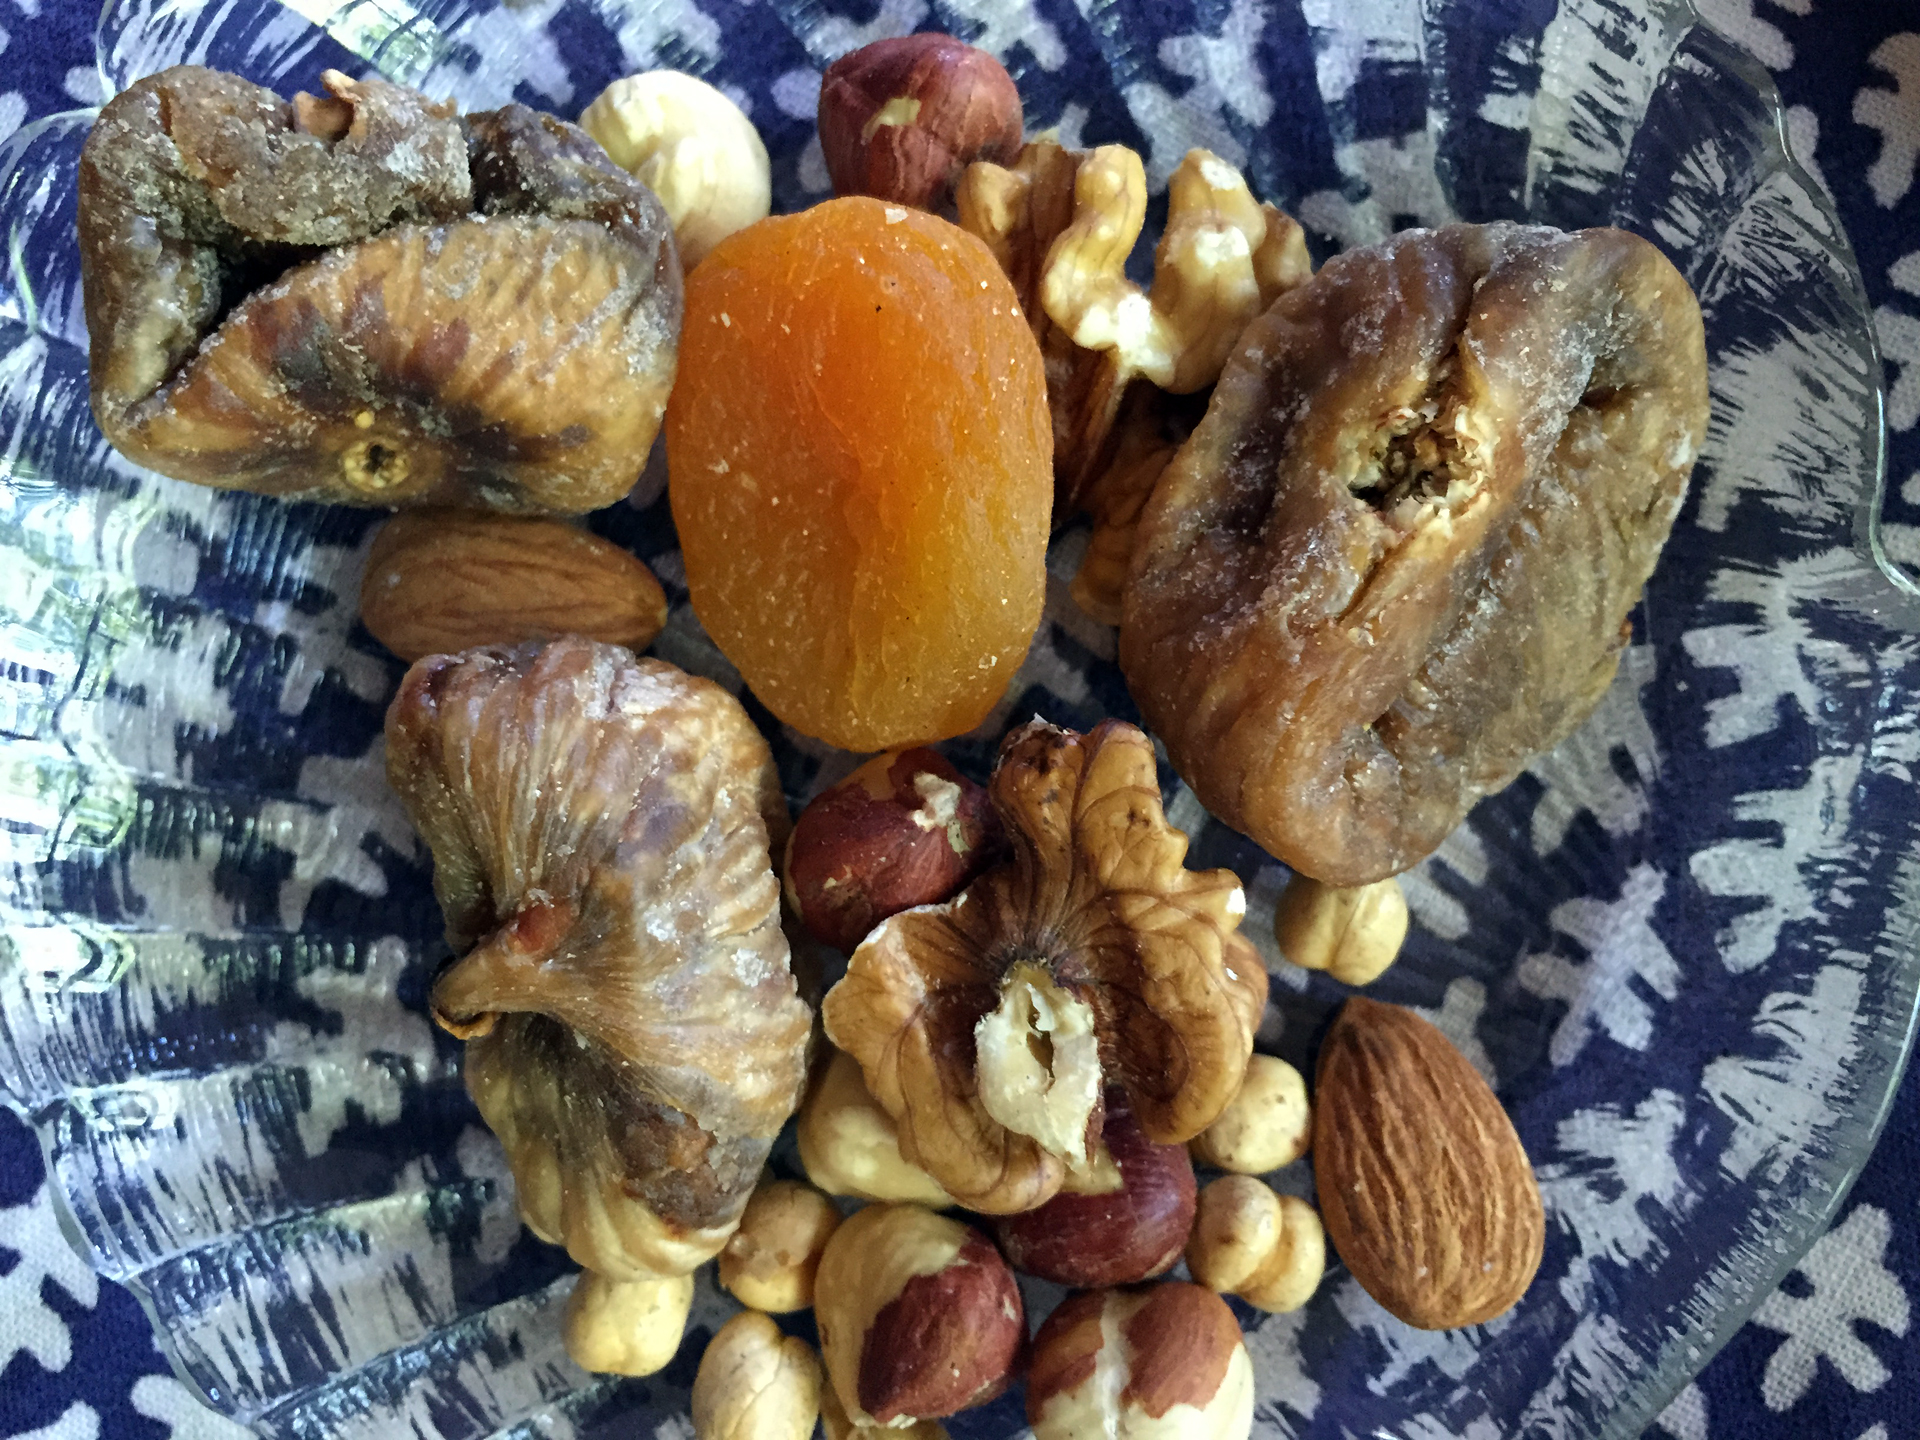 Dried fruits and nuts are displayed on the table and also provided to guests who visit your home to greet you in the new year.